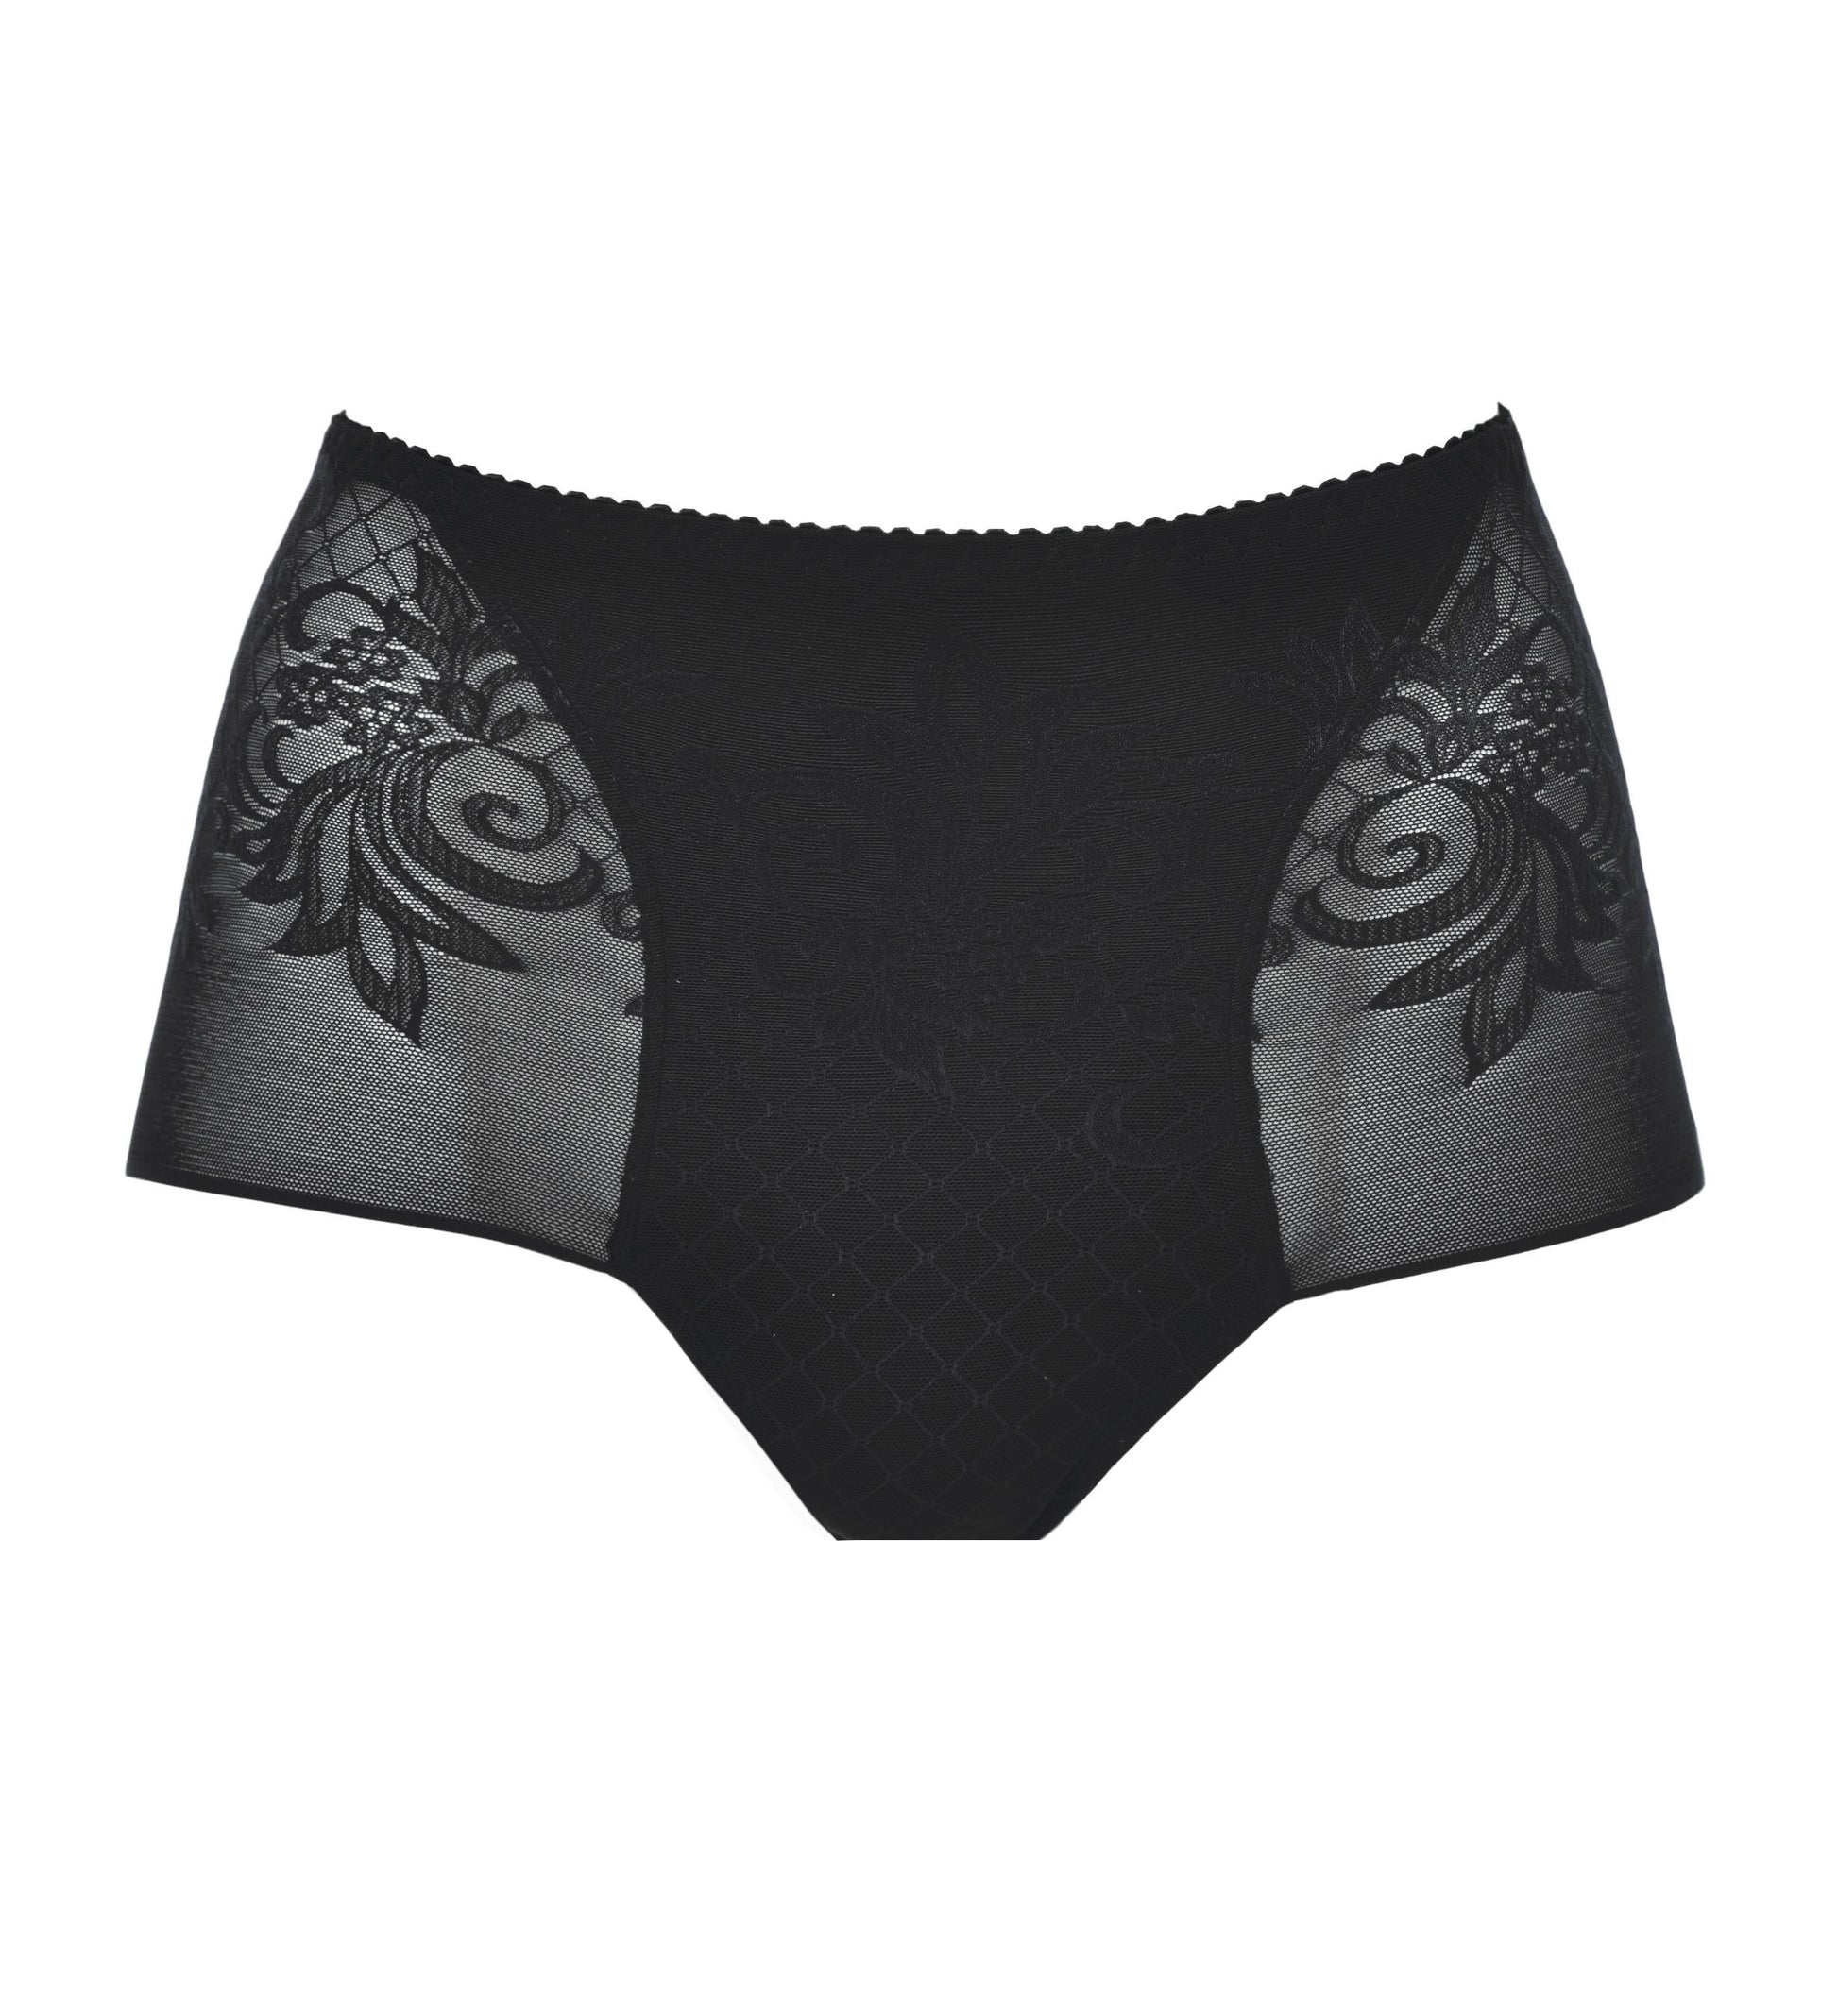 This full-brief from the Free line by Italian brand Leilieve is exquisitely crafted from a delicate semi-sheer jacquard fabric featuring a harmonious blend of floral and geometric patterns. The ultra-thin and soft fabric is highly stretchy and offers superior comfort, making it perfect for all day wear.